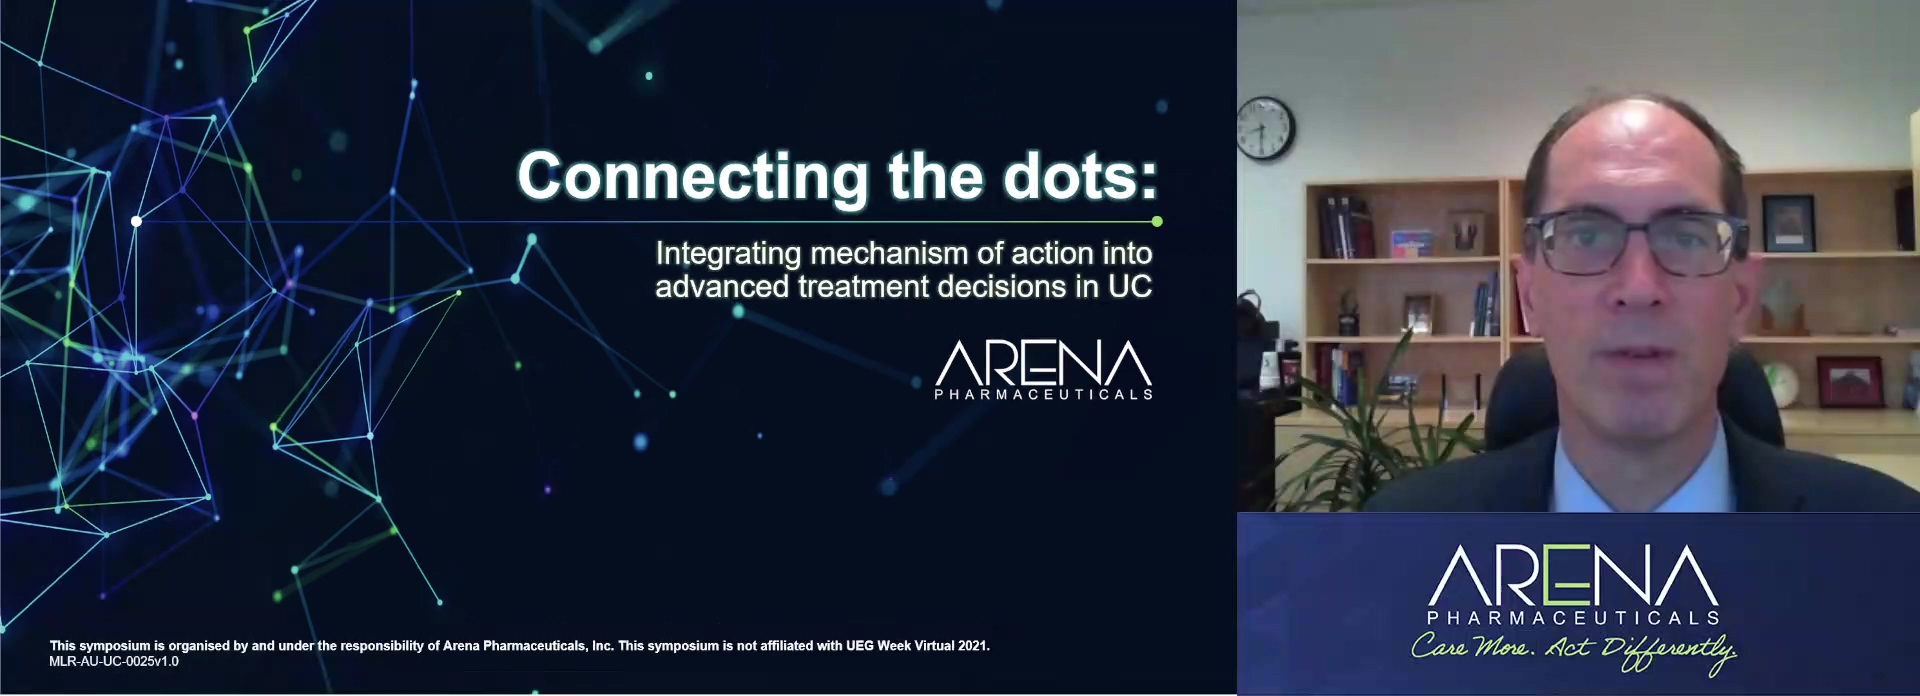 Connecting the dots: Integrating mechanism of action into advanced treatment decisions in UC (Arena Pharmaceuticals)